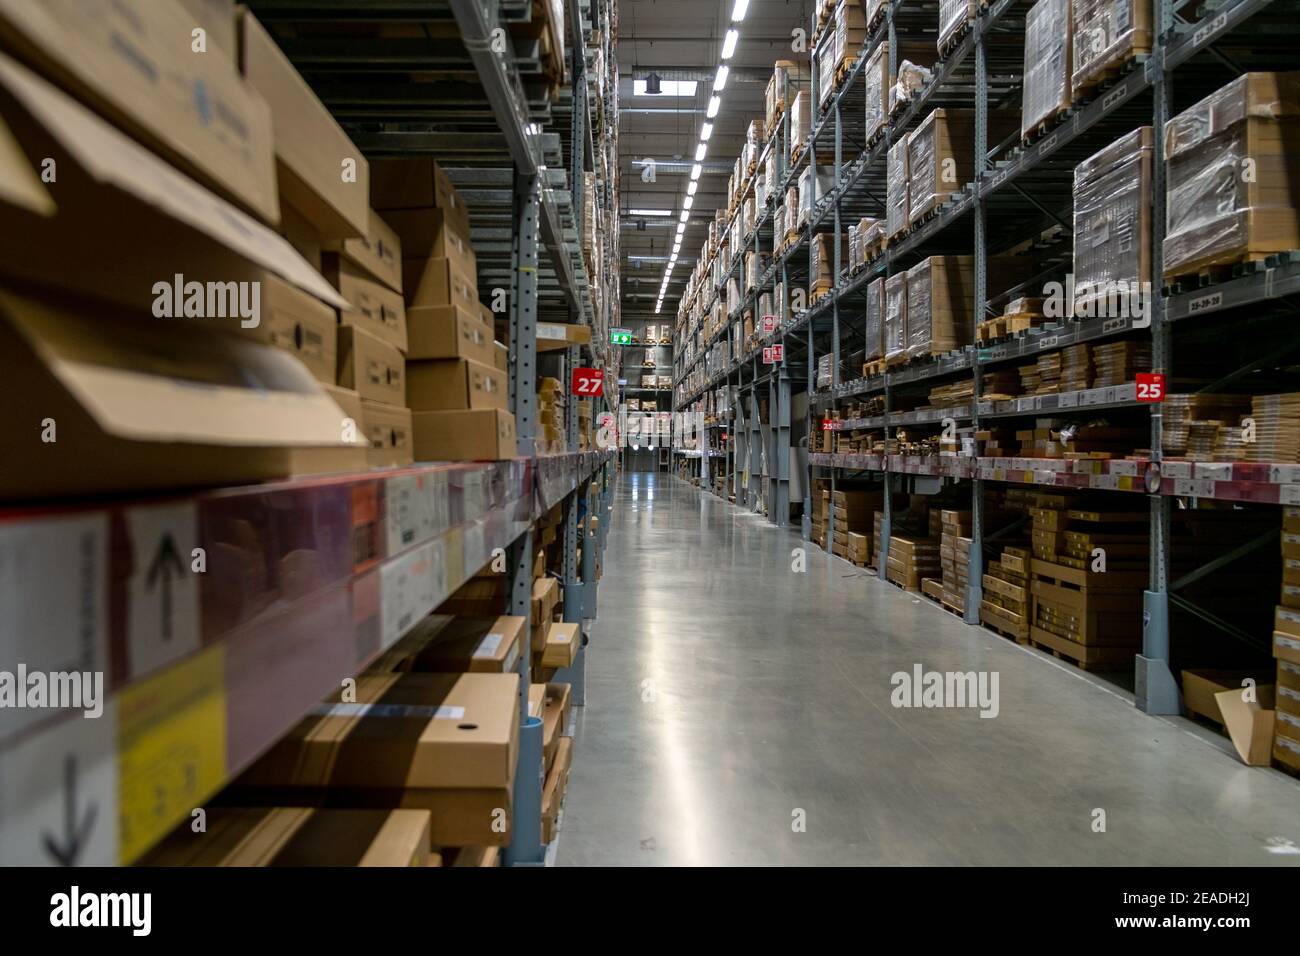 Smut Prakan ,Thailand - Febuary 03,2019: Warehouse aisle in an IKEA store. IKEA is the world's largest furniture retailer. Stock Photo